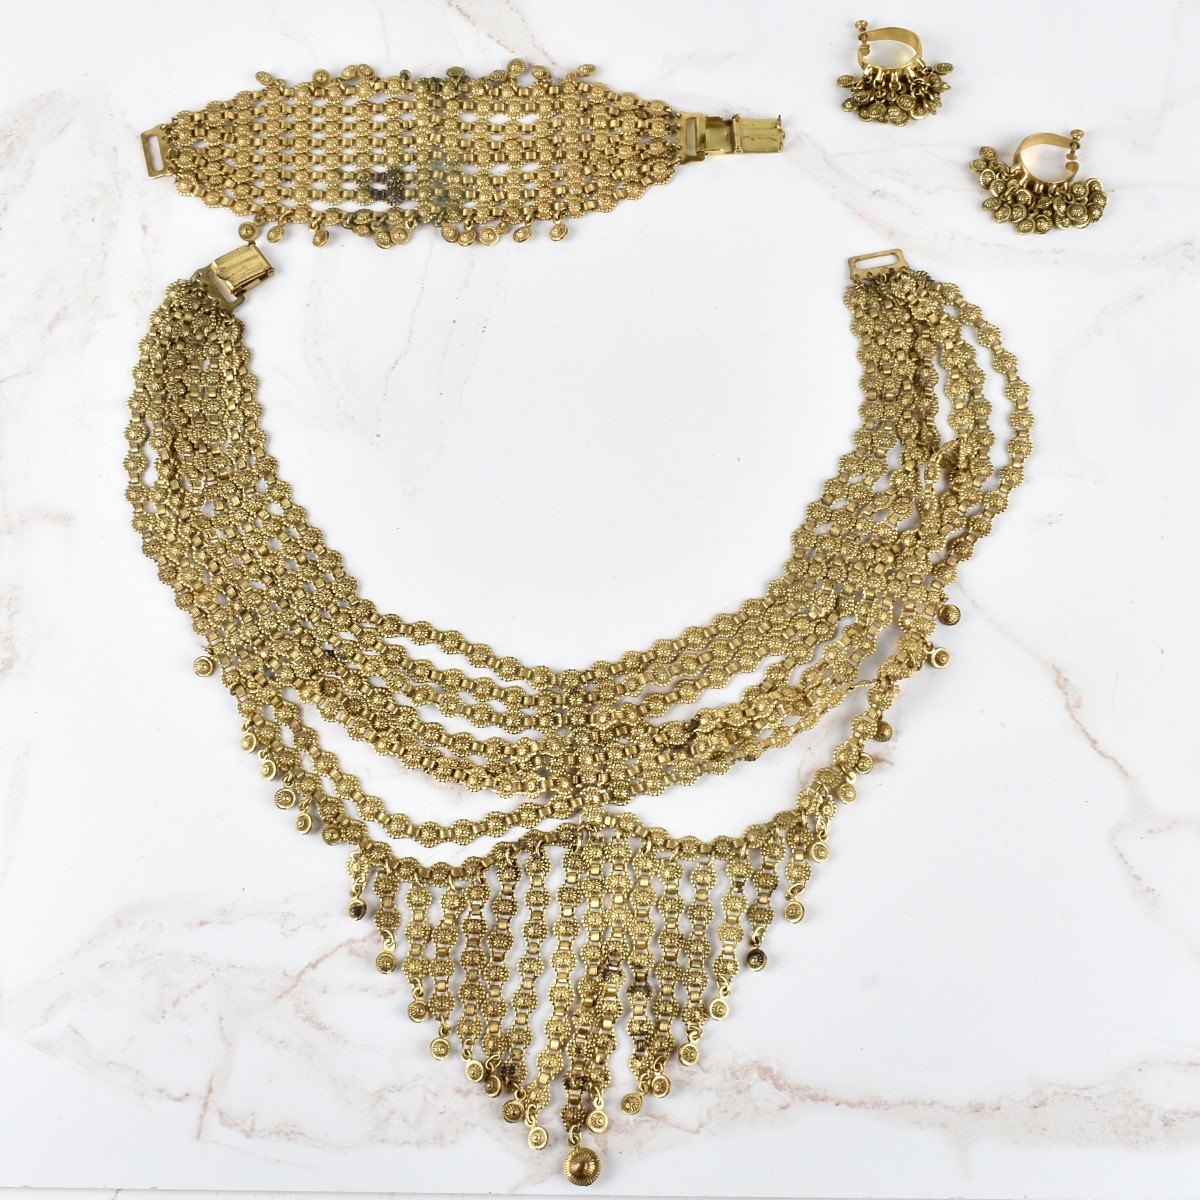 Necklace, Bracelet and Earrings Suite